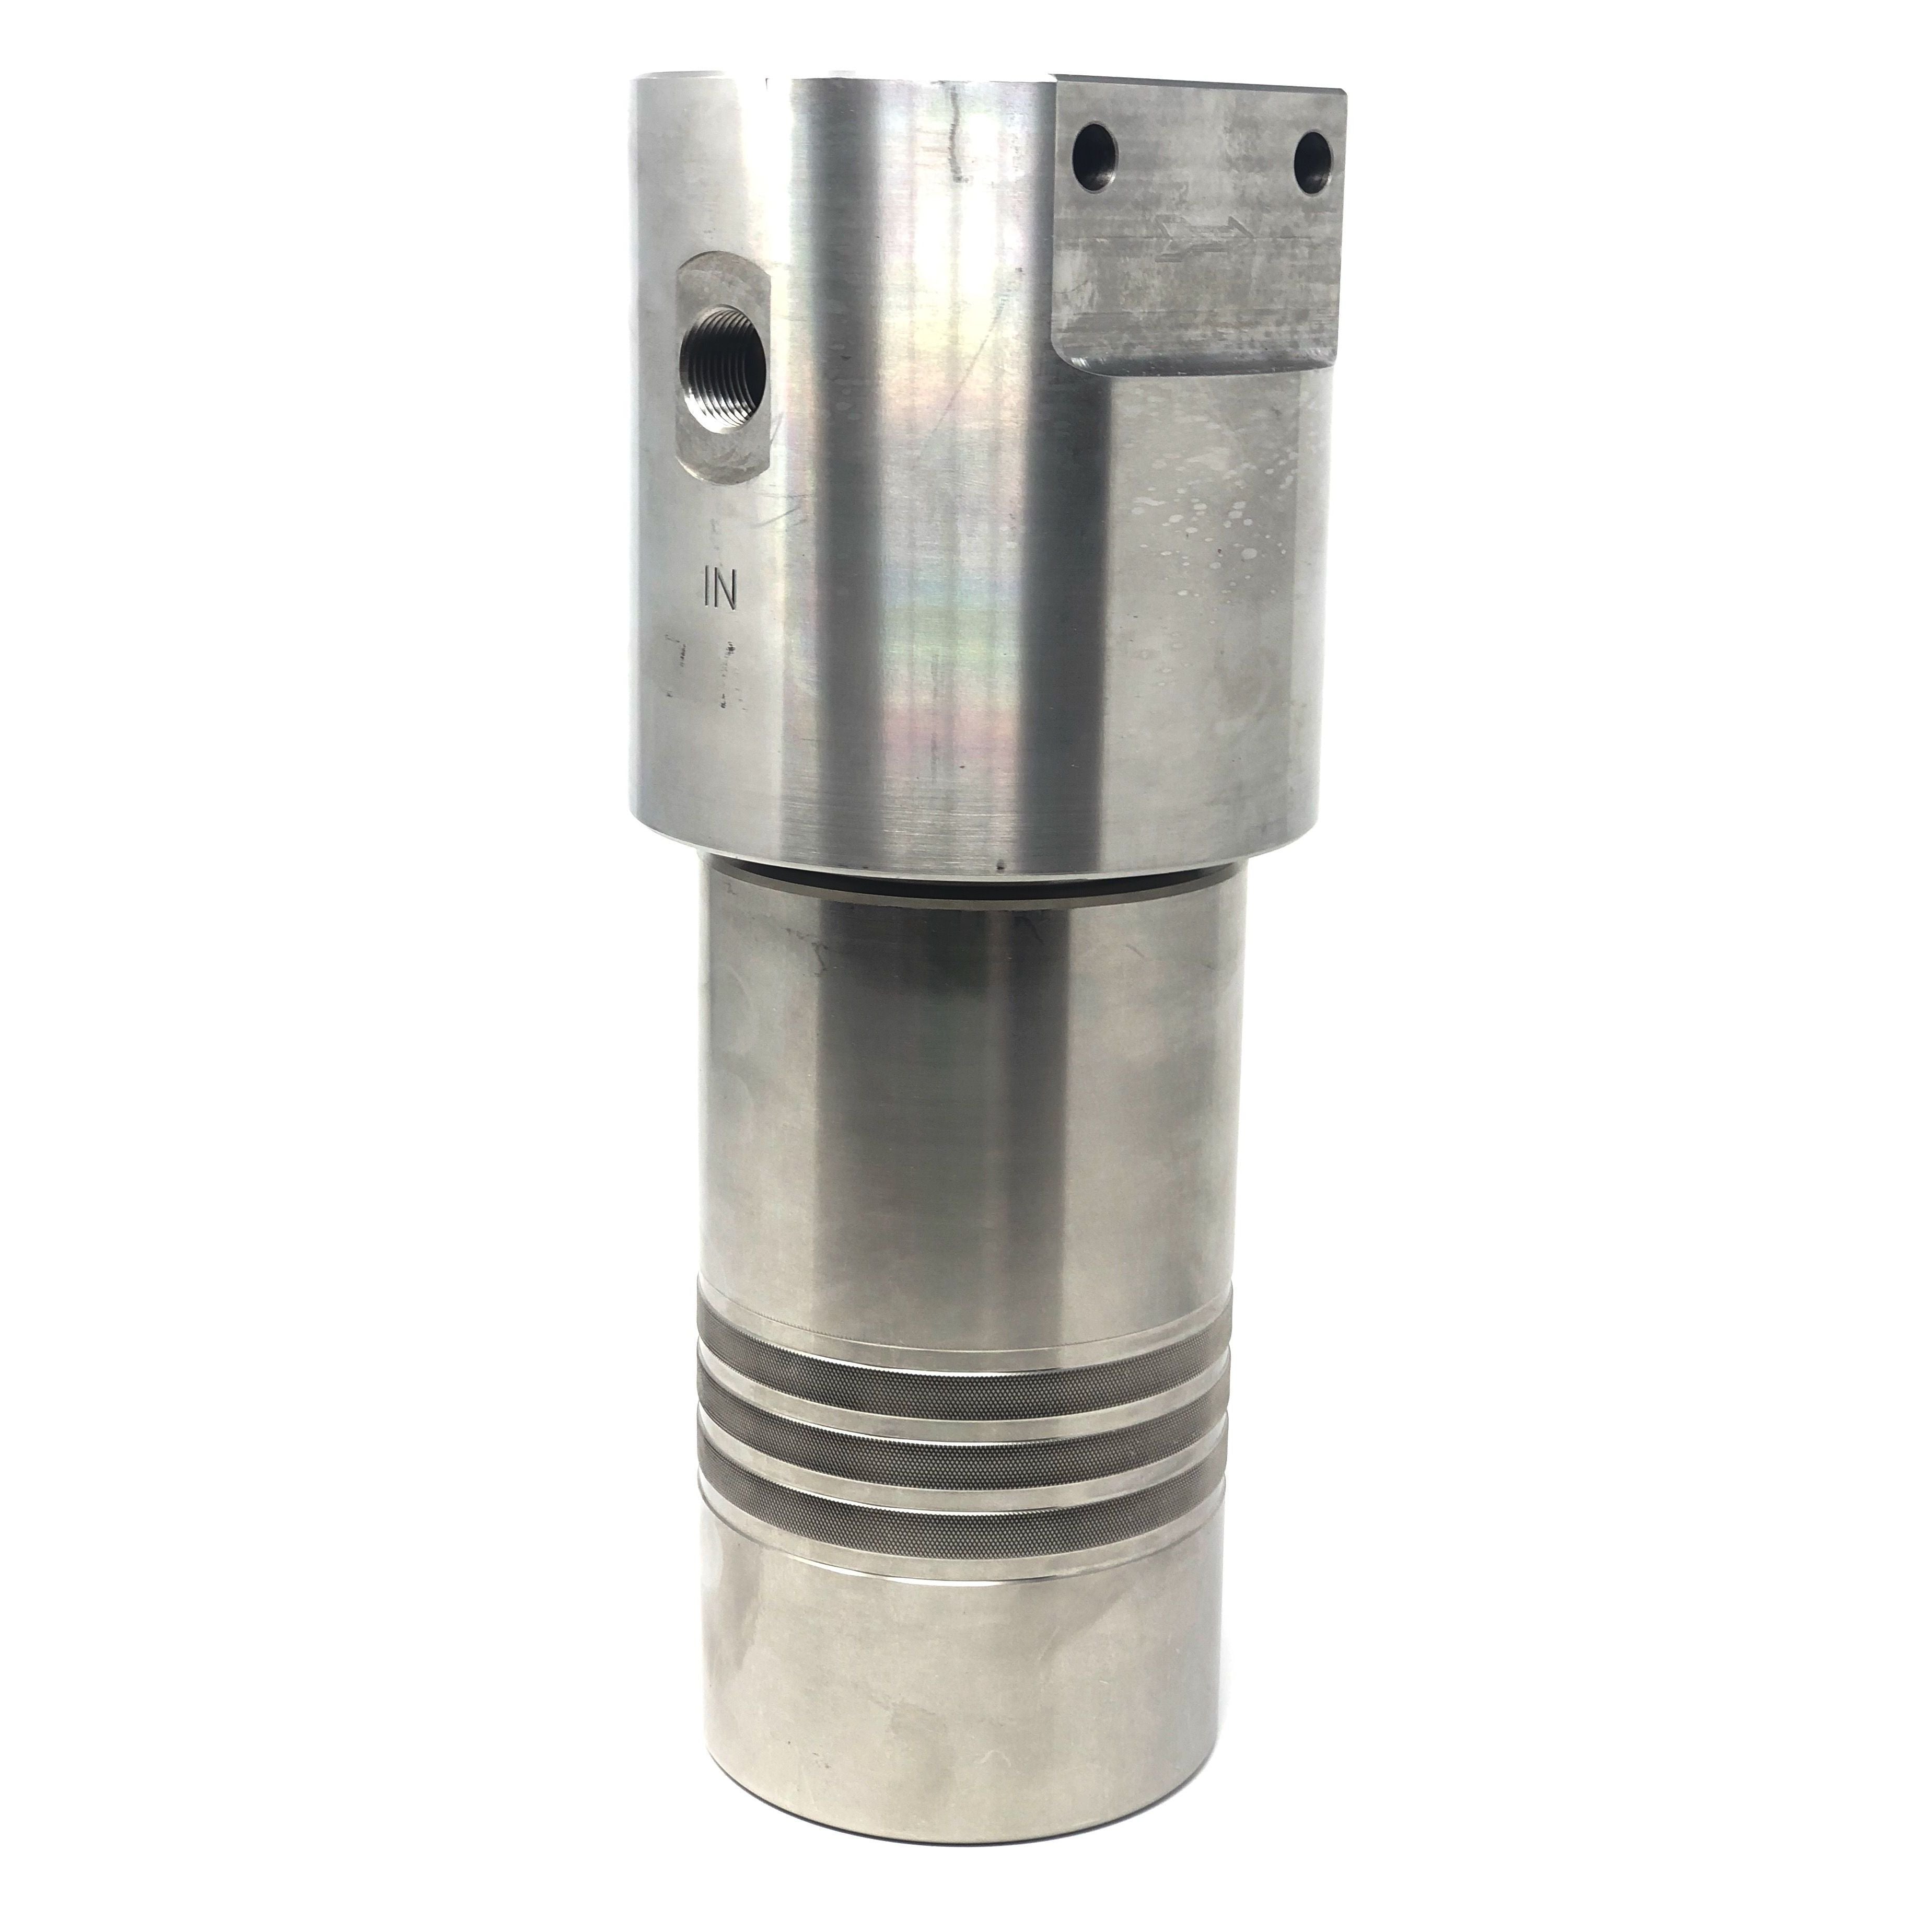 52S-248N-40SEN : Chase Ultra High Pressure Inline Filter, 10000psi, 1/2" NPT, 40 Micron, With Visual Indicator, No Bypass